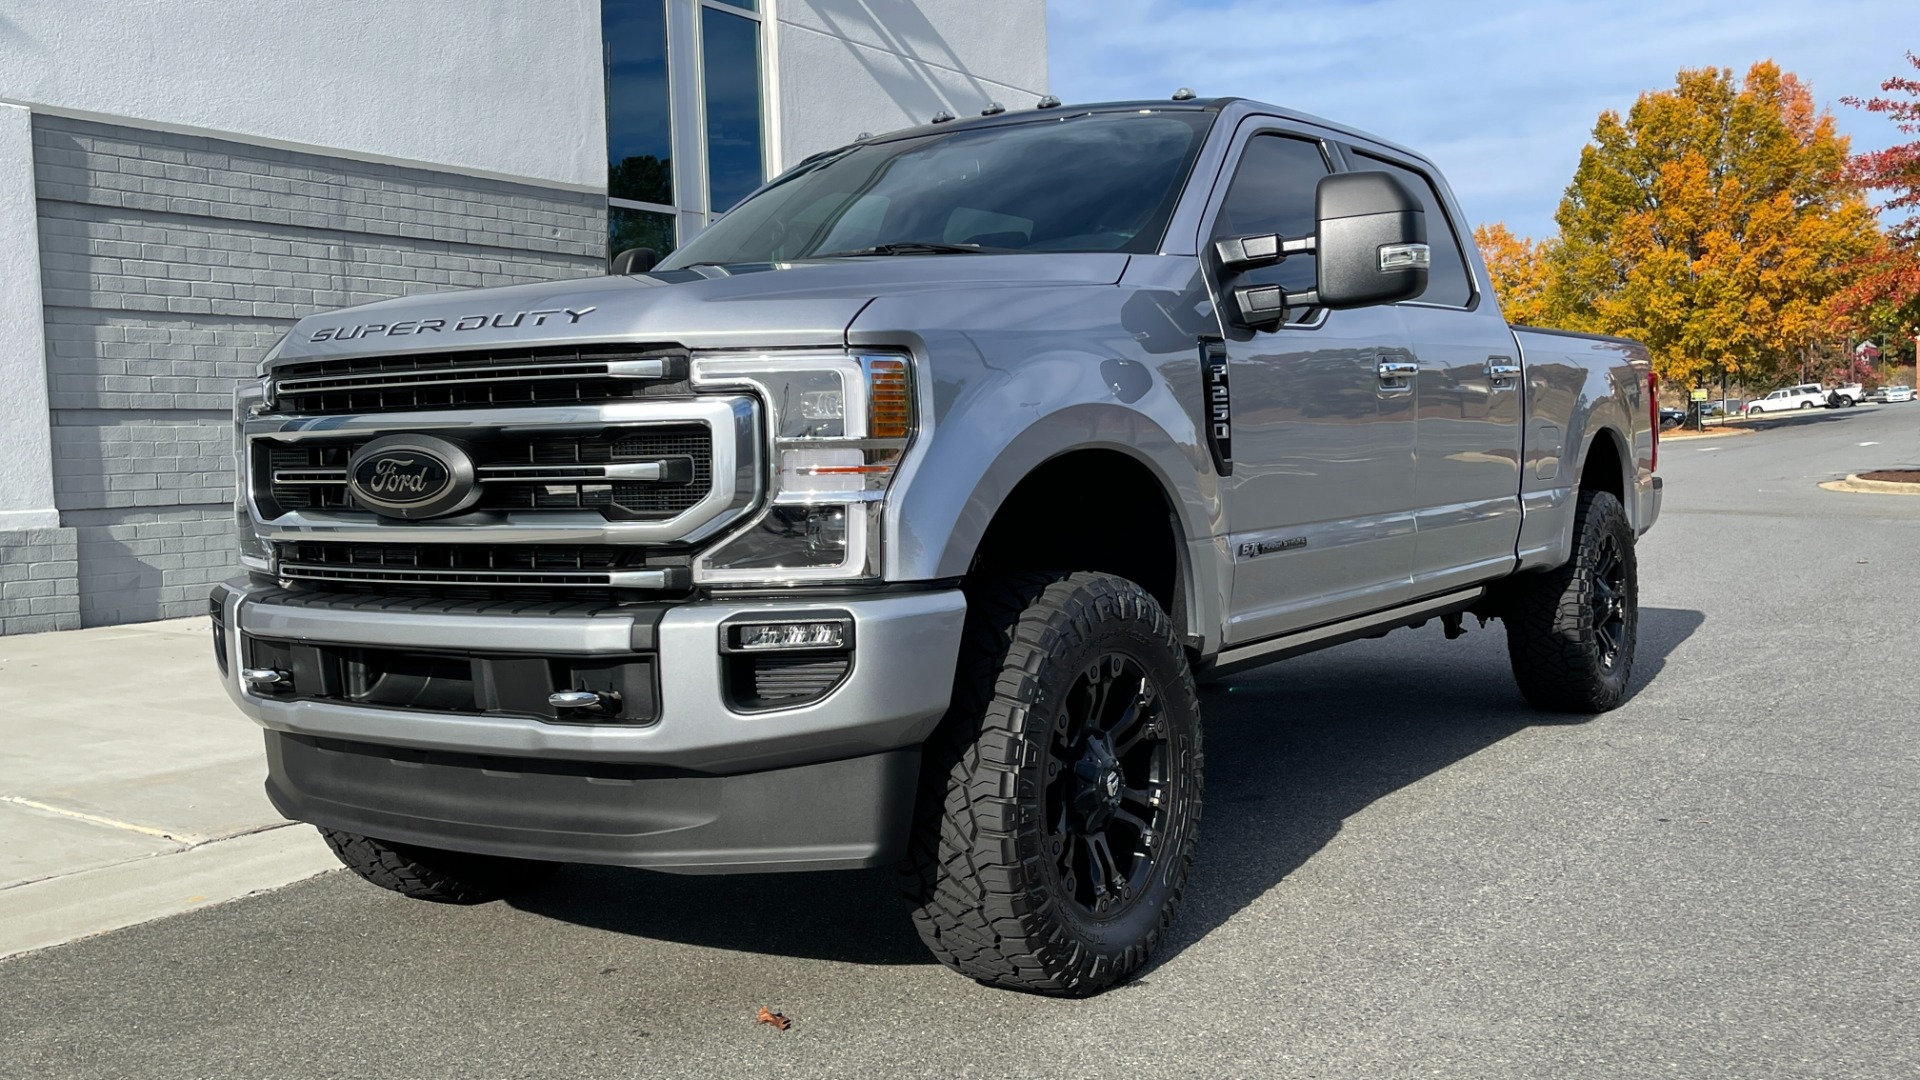 Used 2022 Ford Super Duty F-250 SRW PLATINUM / 6.7L DIESEL / PANORAMIC ROOF / BLACKOUT / FUEL WHEELS / TOW PACK for sale $94,999 at Formula Imports in Charlotte NC 28227 2